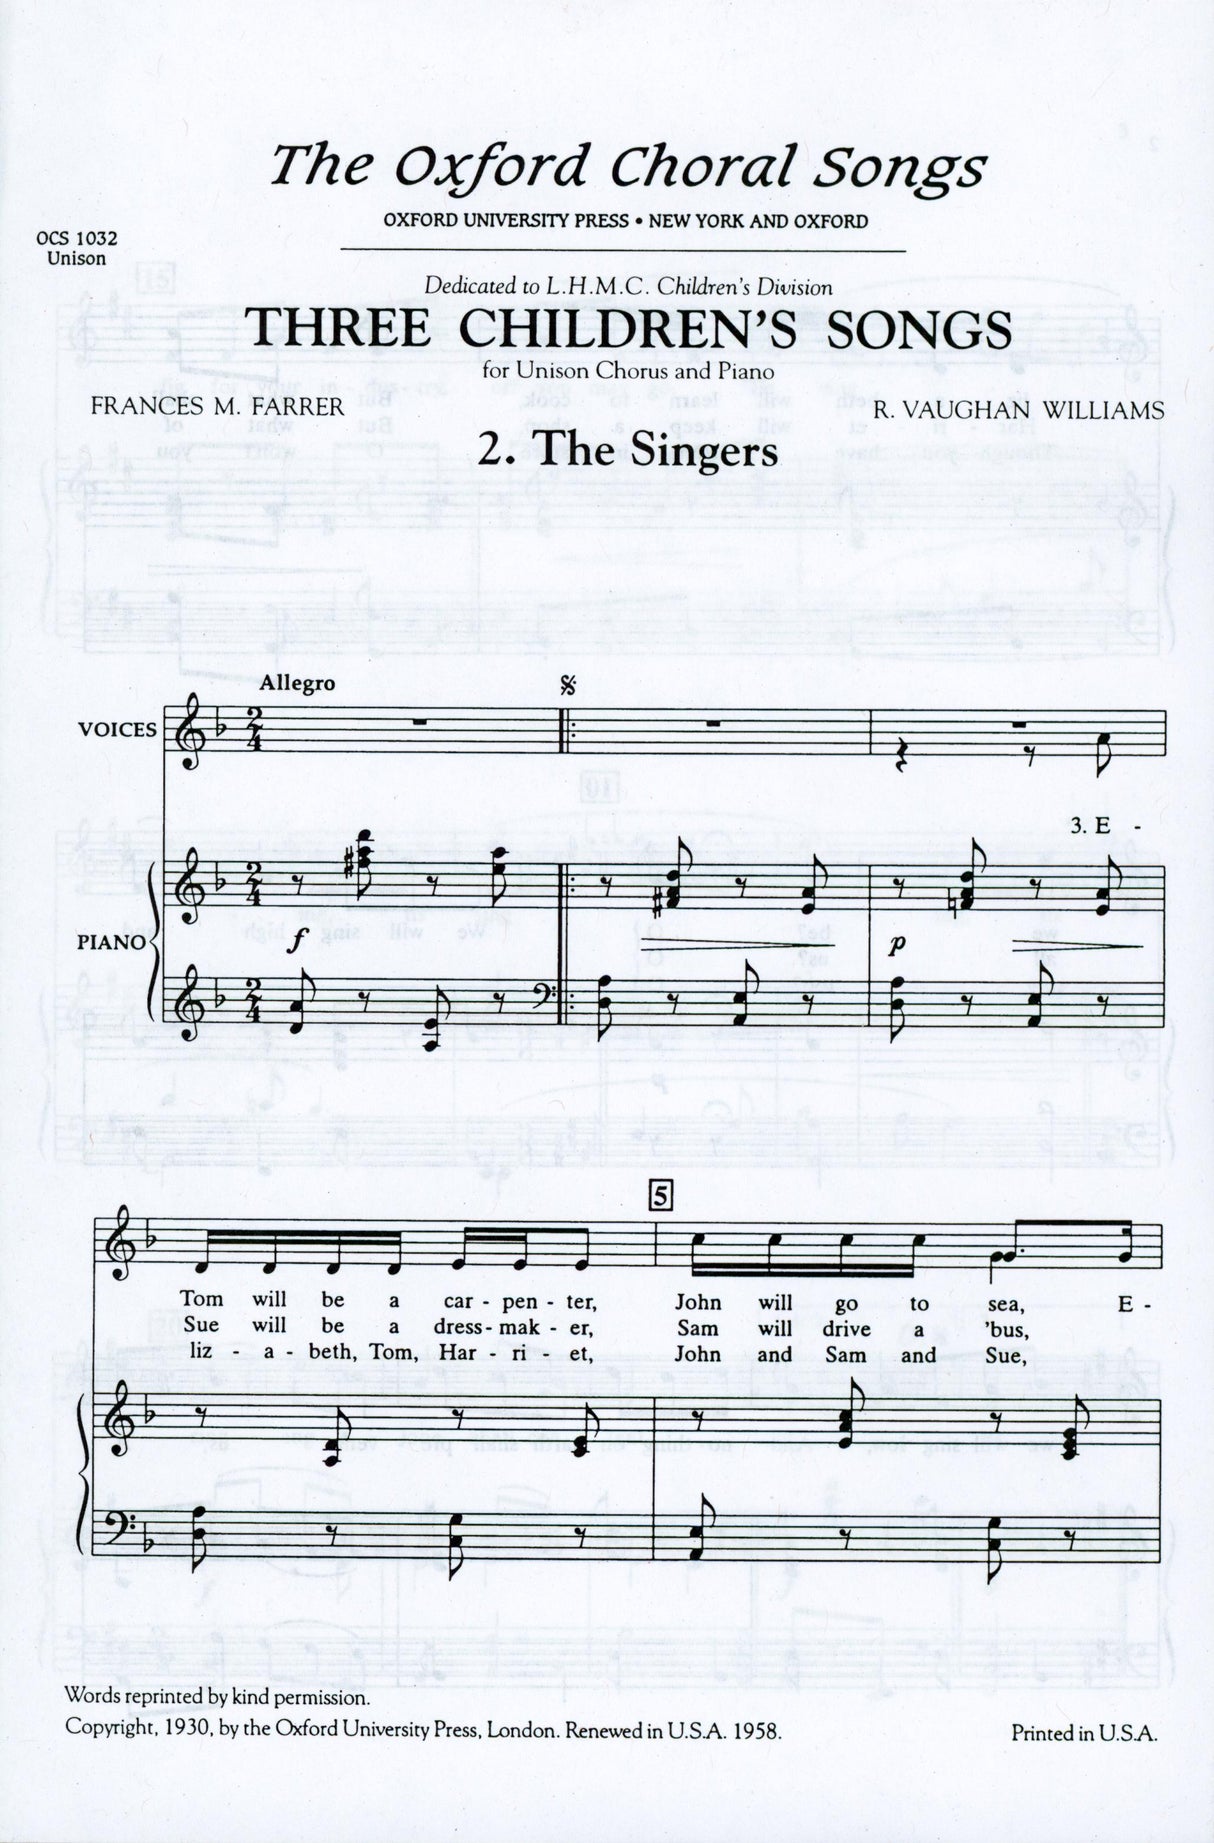 Vaughan Williams: The Singers from 3 Children's Songs